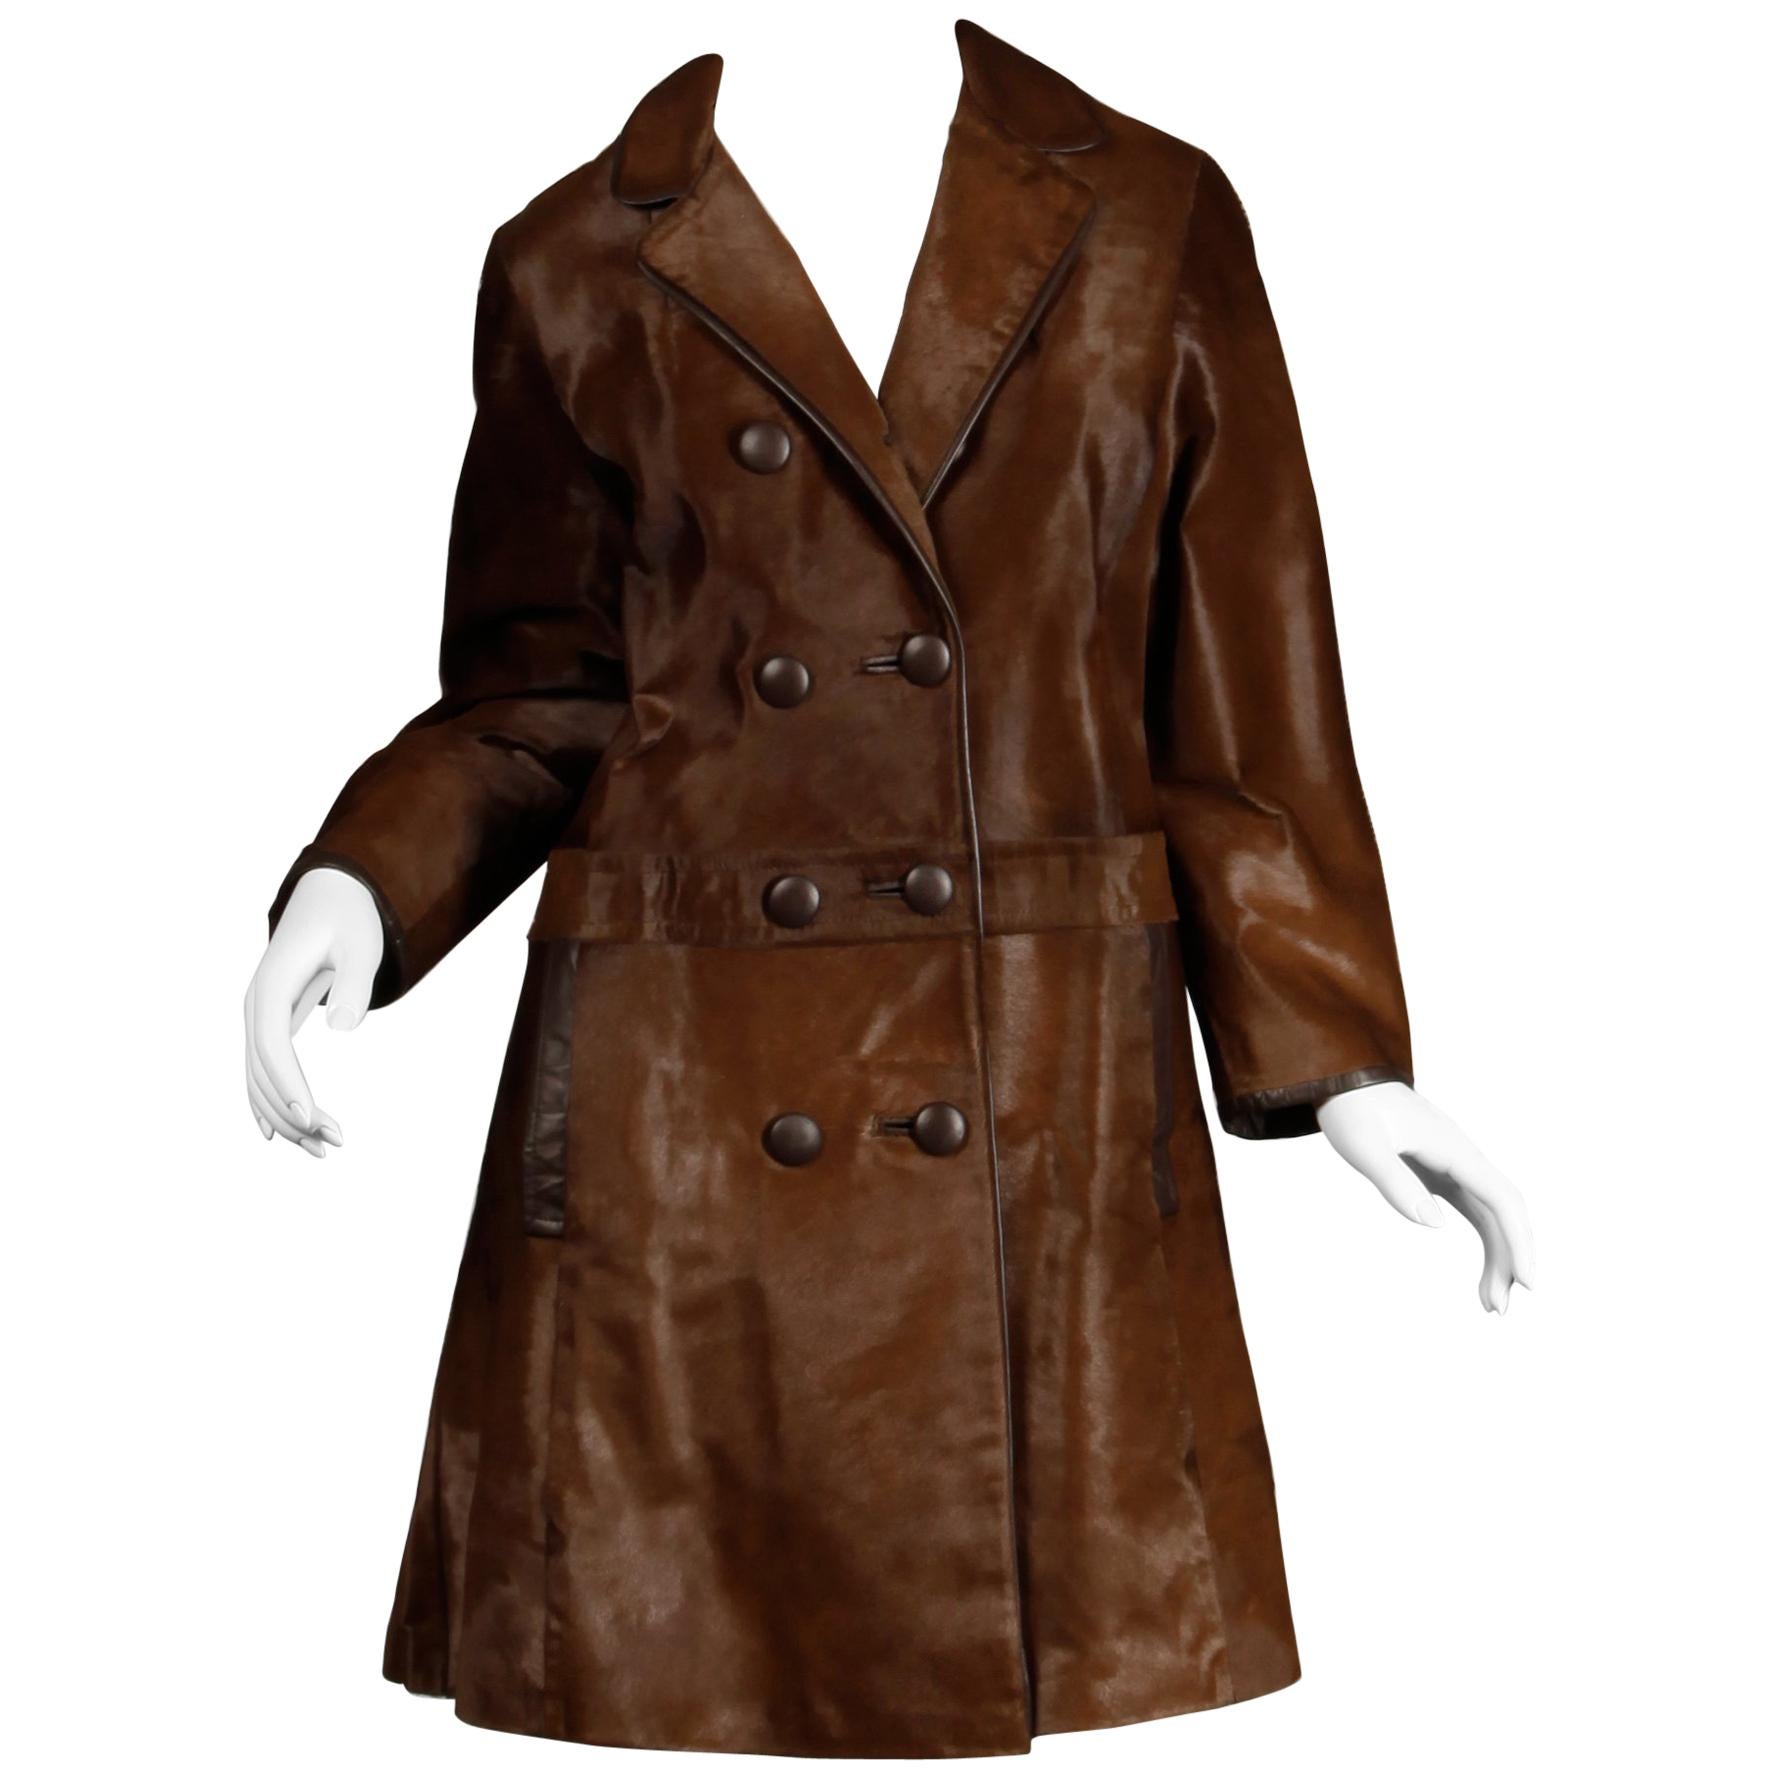 Stunning 1960s Vintage Pony Hair or Cowhide Brown Fur Coat with Leather Trim For Sale